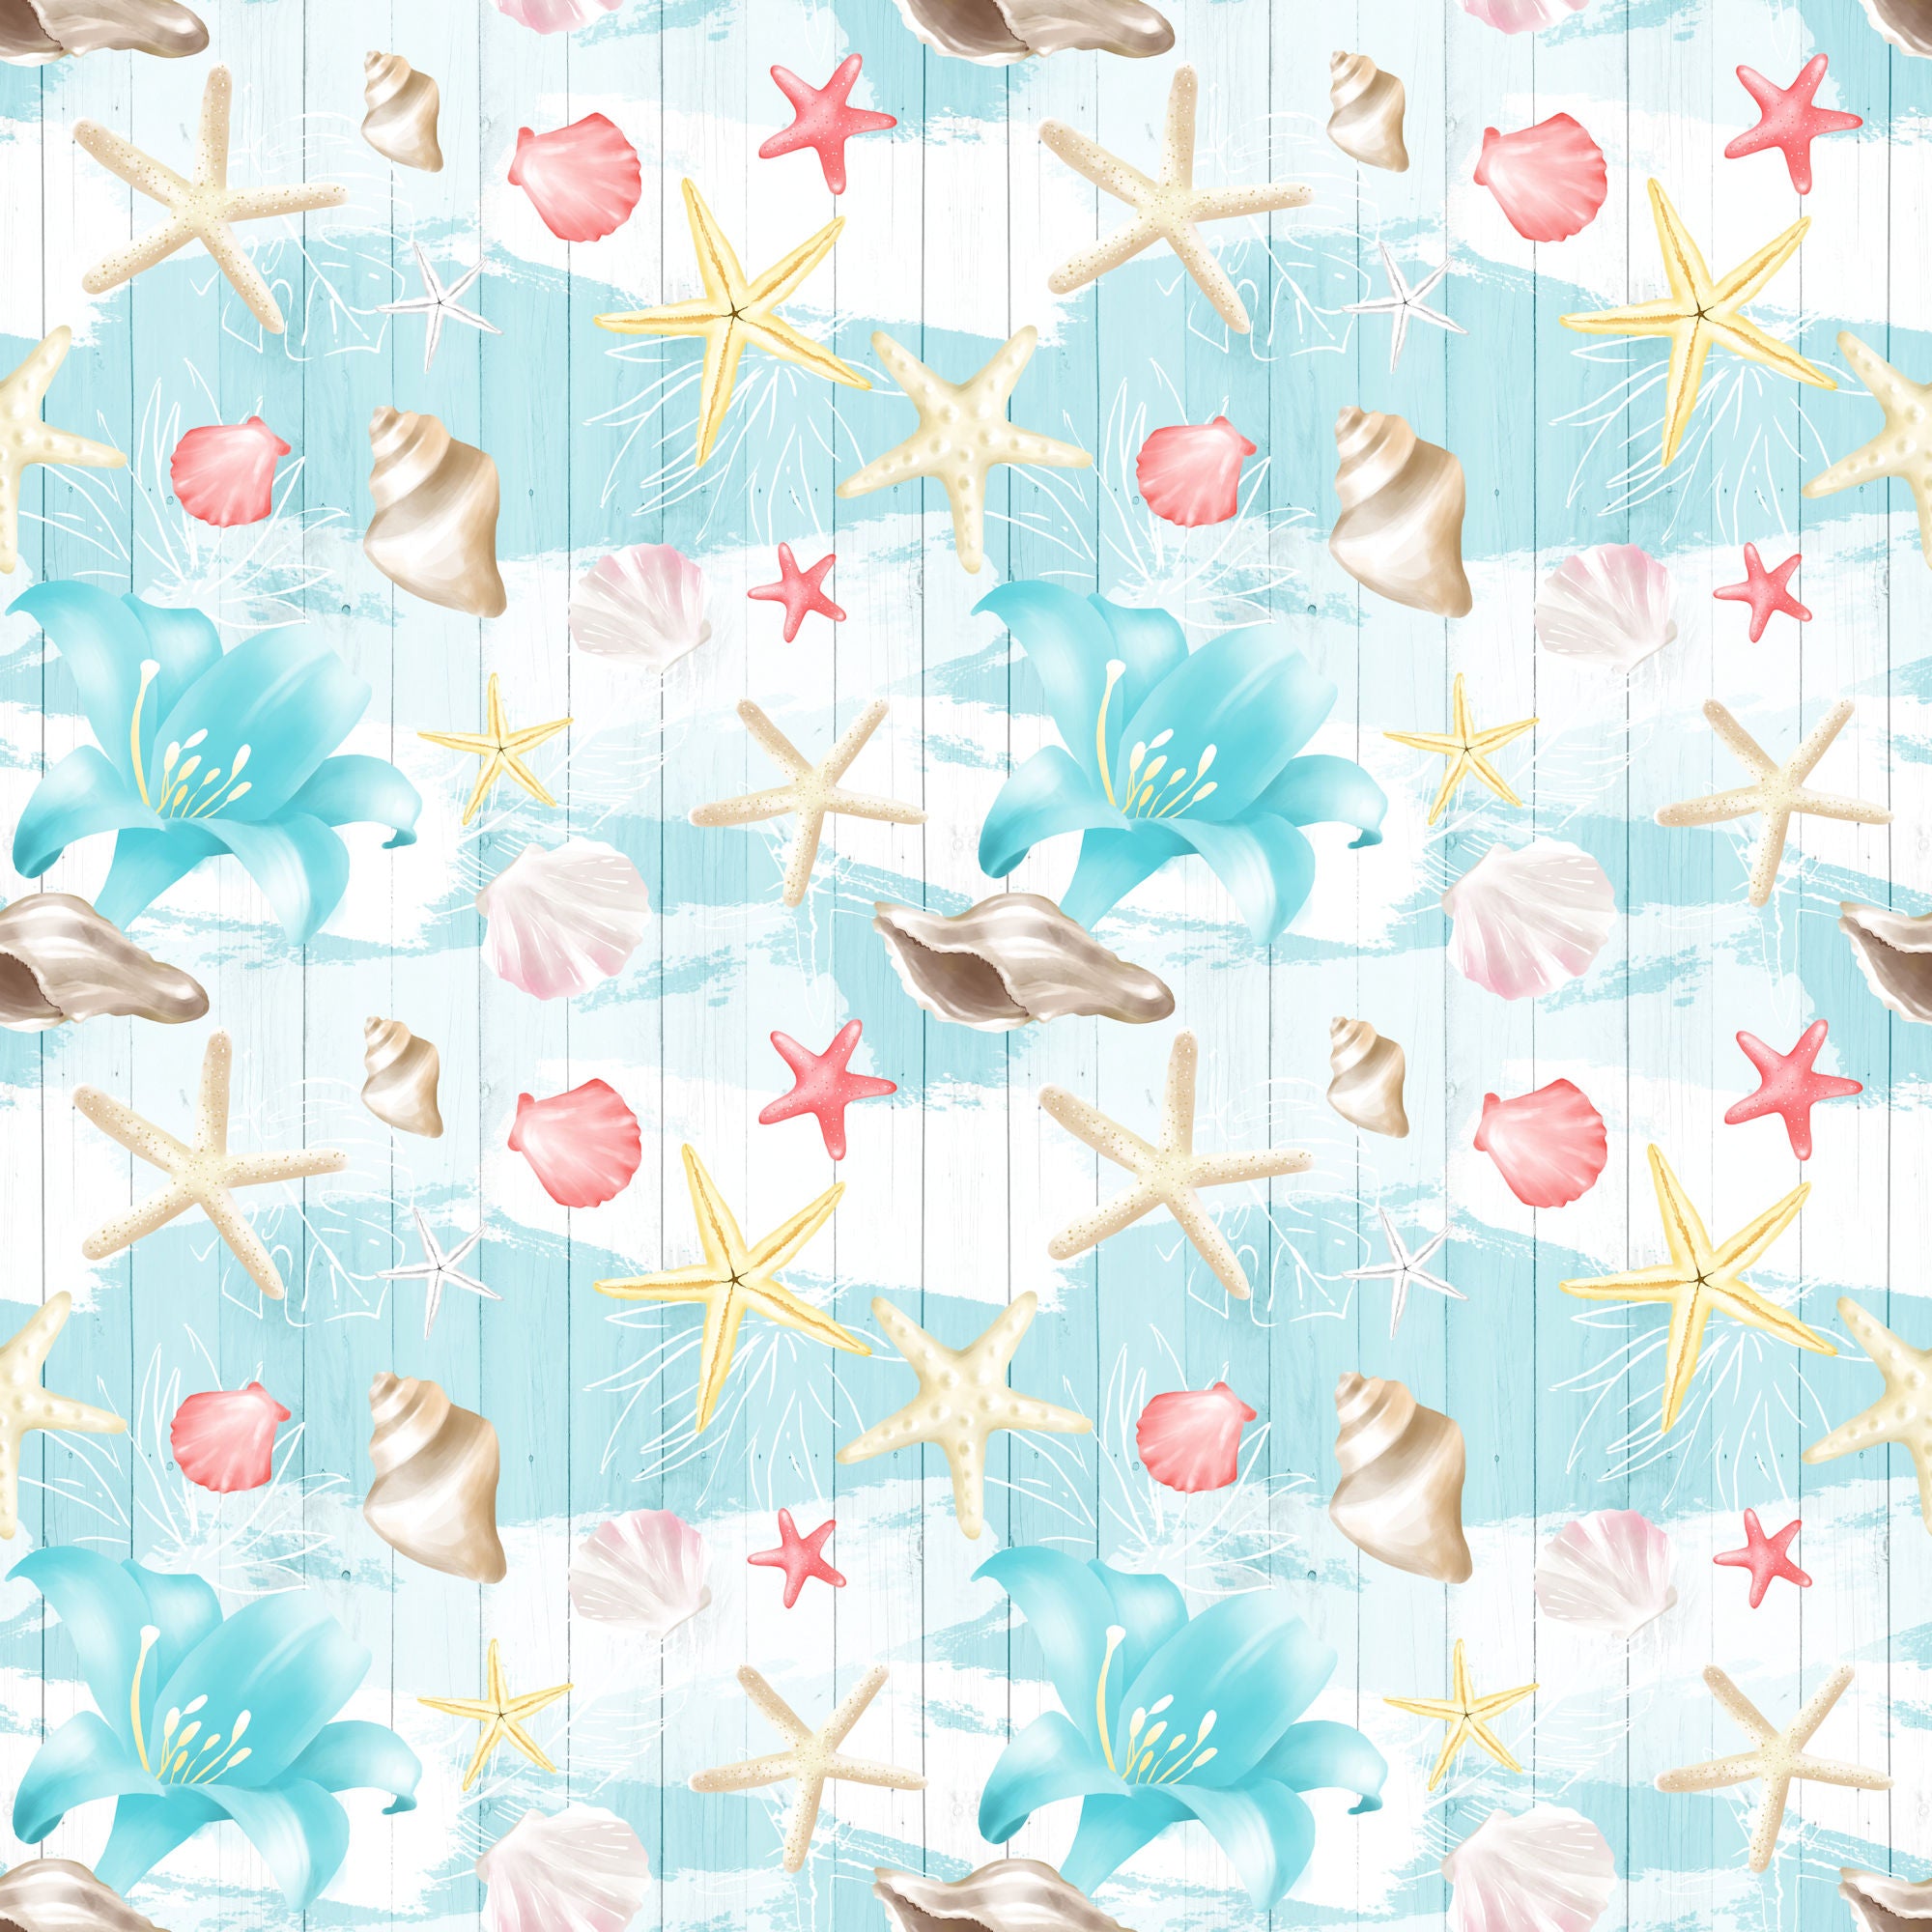 Nautical Summer Collection Seashell Collage 12 x 12 Double-Sided Scrapbook Paper by SSC Designs